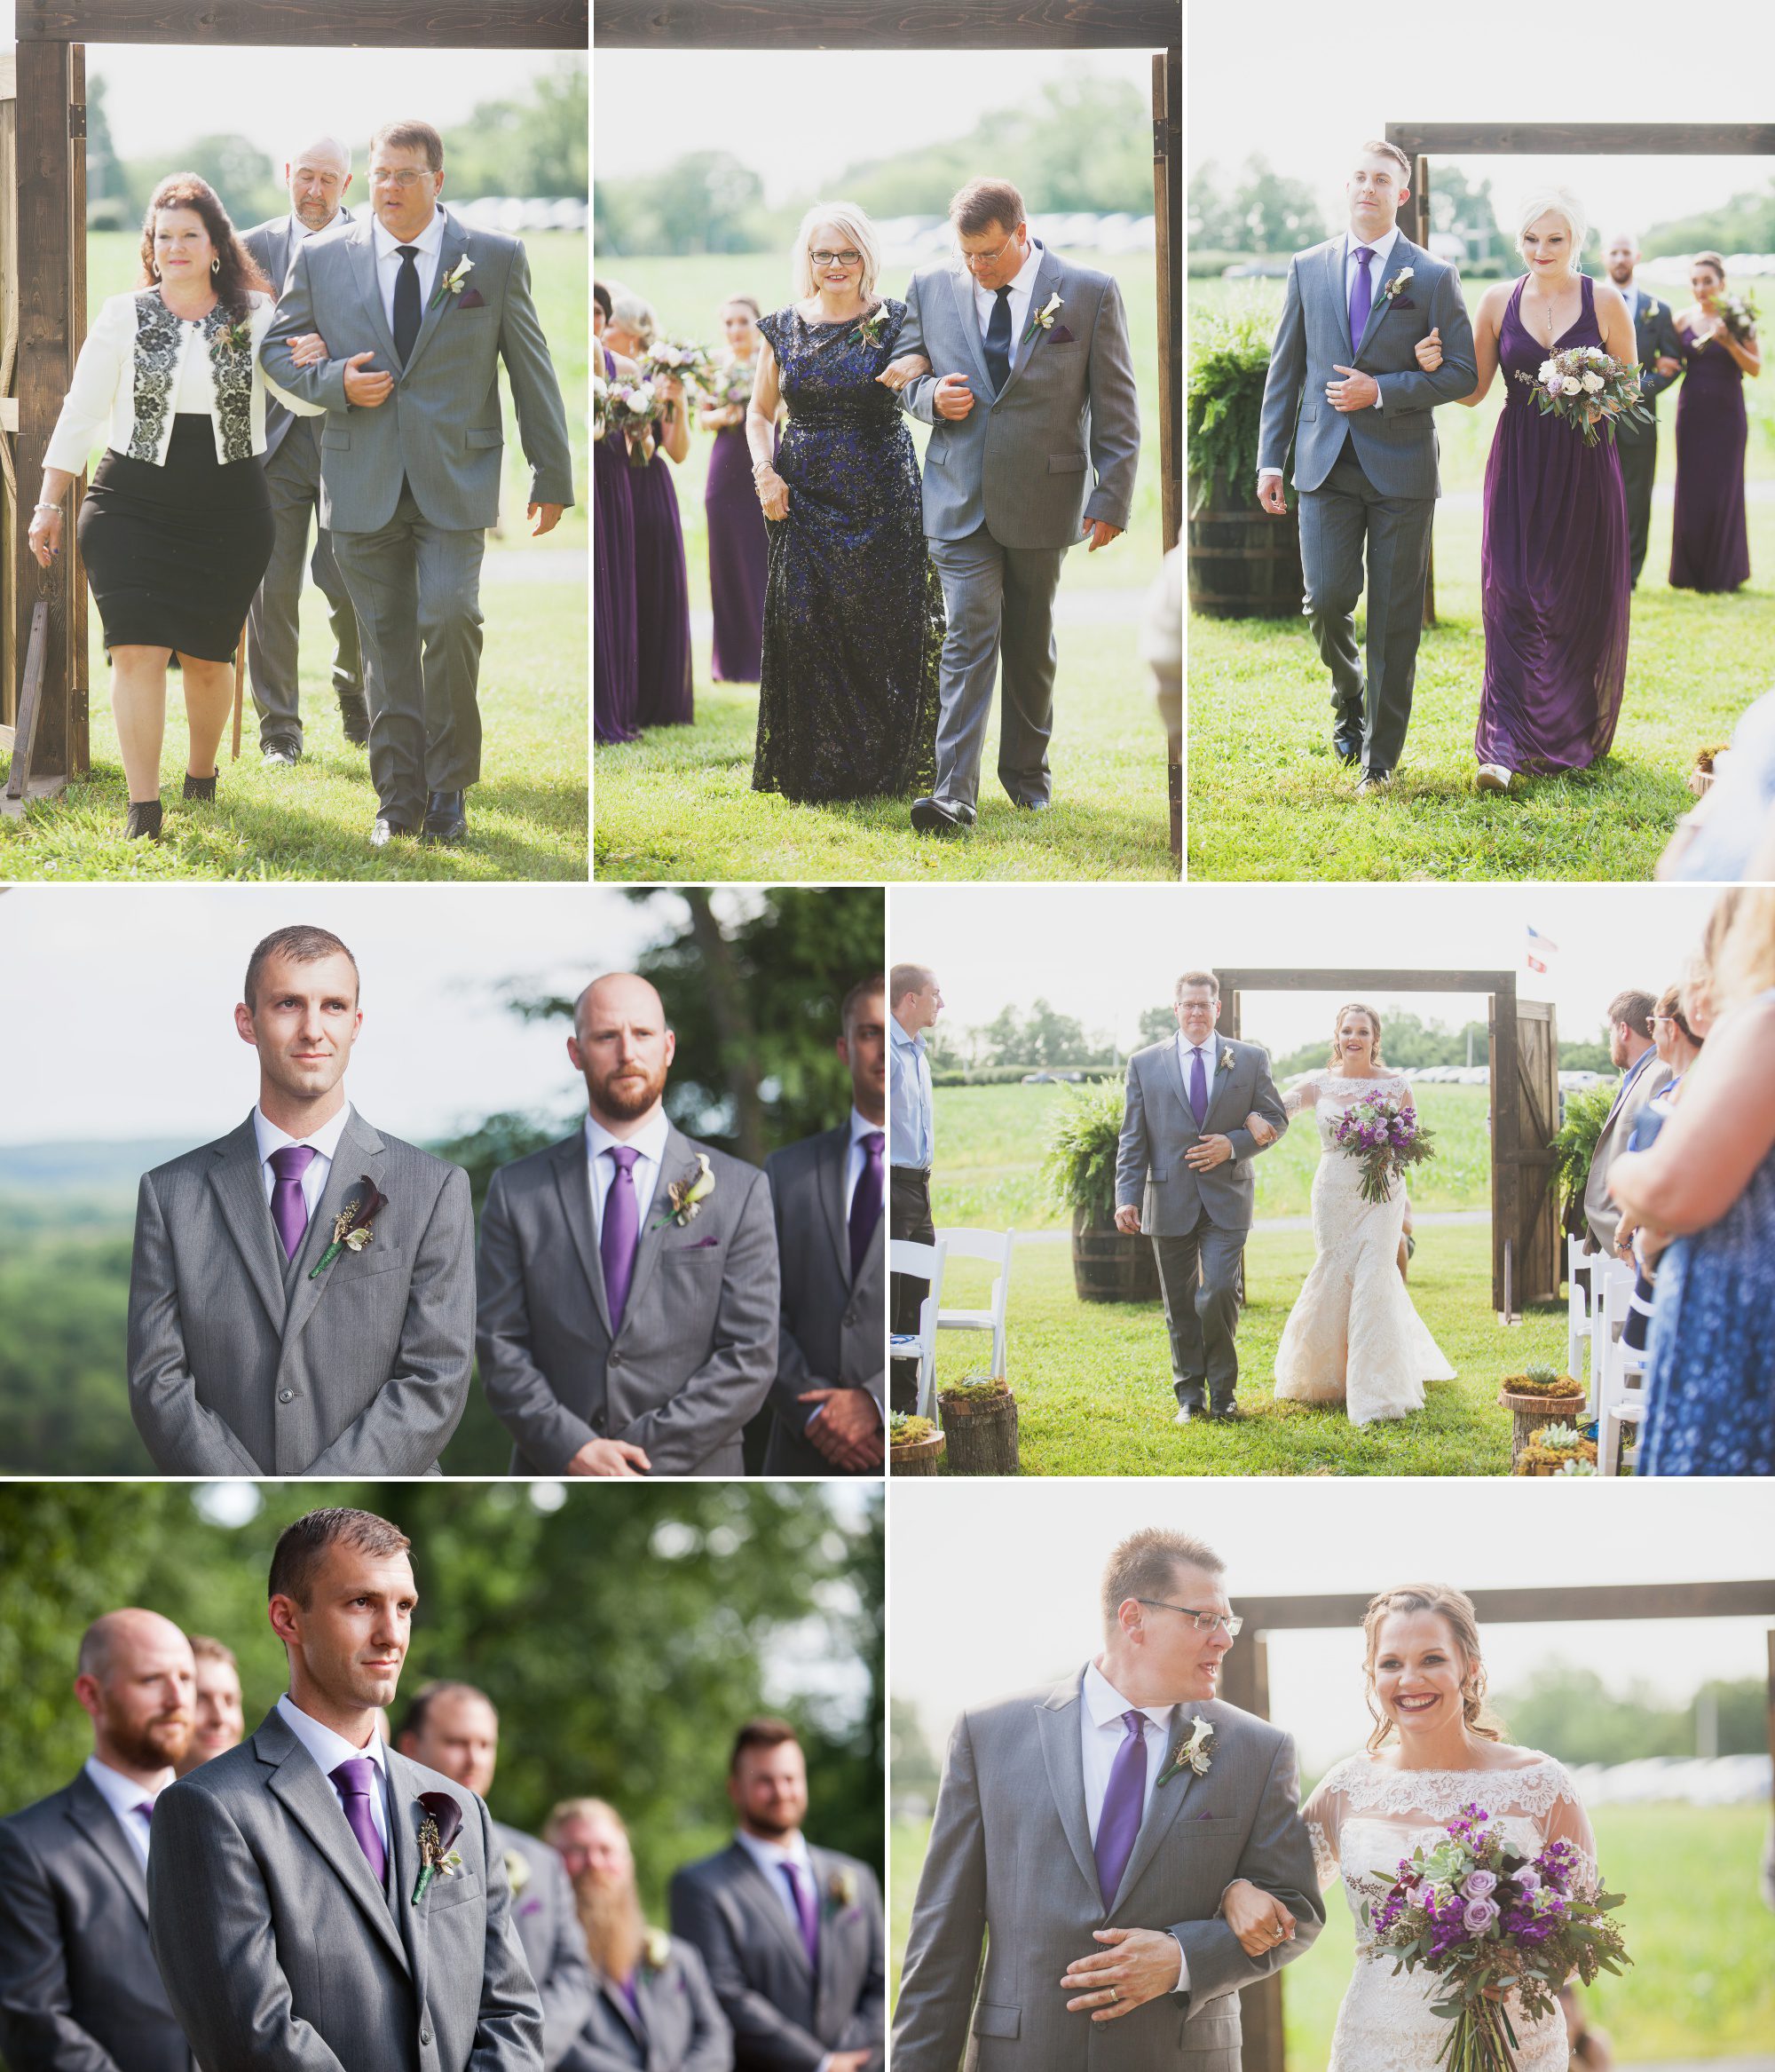 Wedding processional at summer wedding at Owen Farm in Chapmansboro, TN. Photography by Krista Lee Photography. 